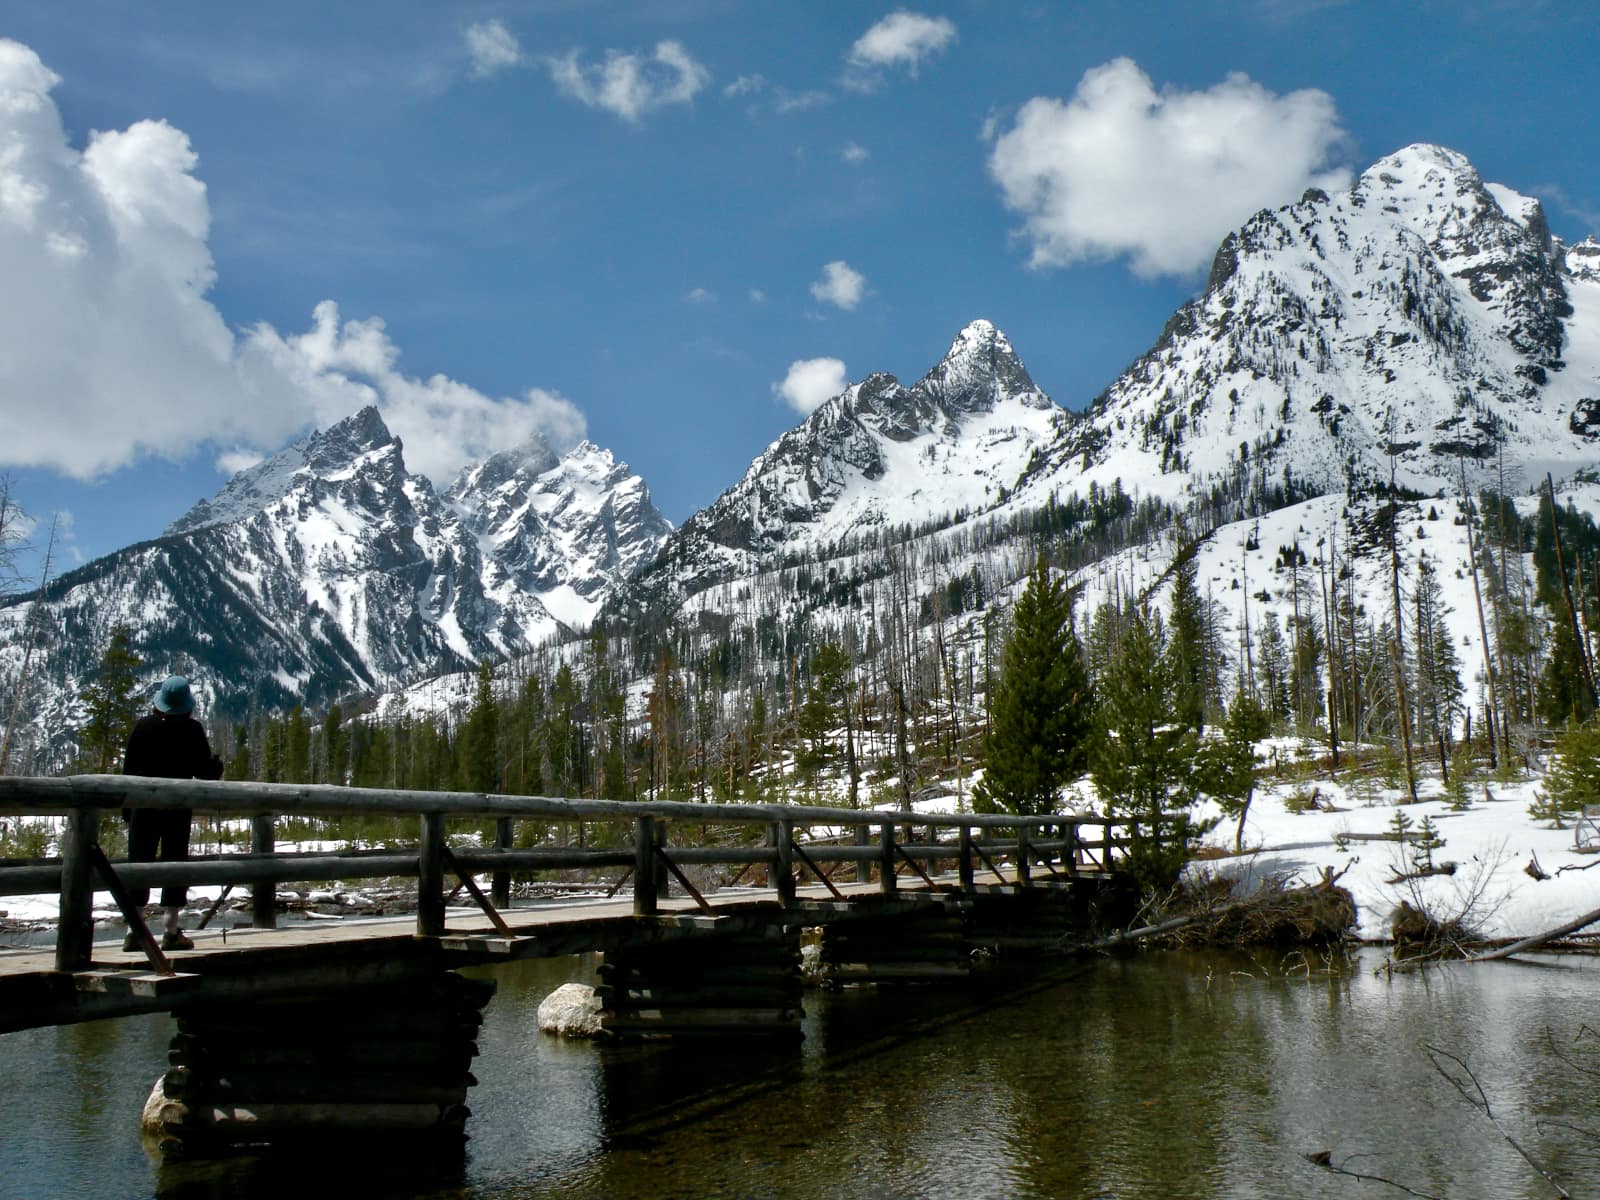 Wooden bridge over river in foreground with snow covered mountains in background